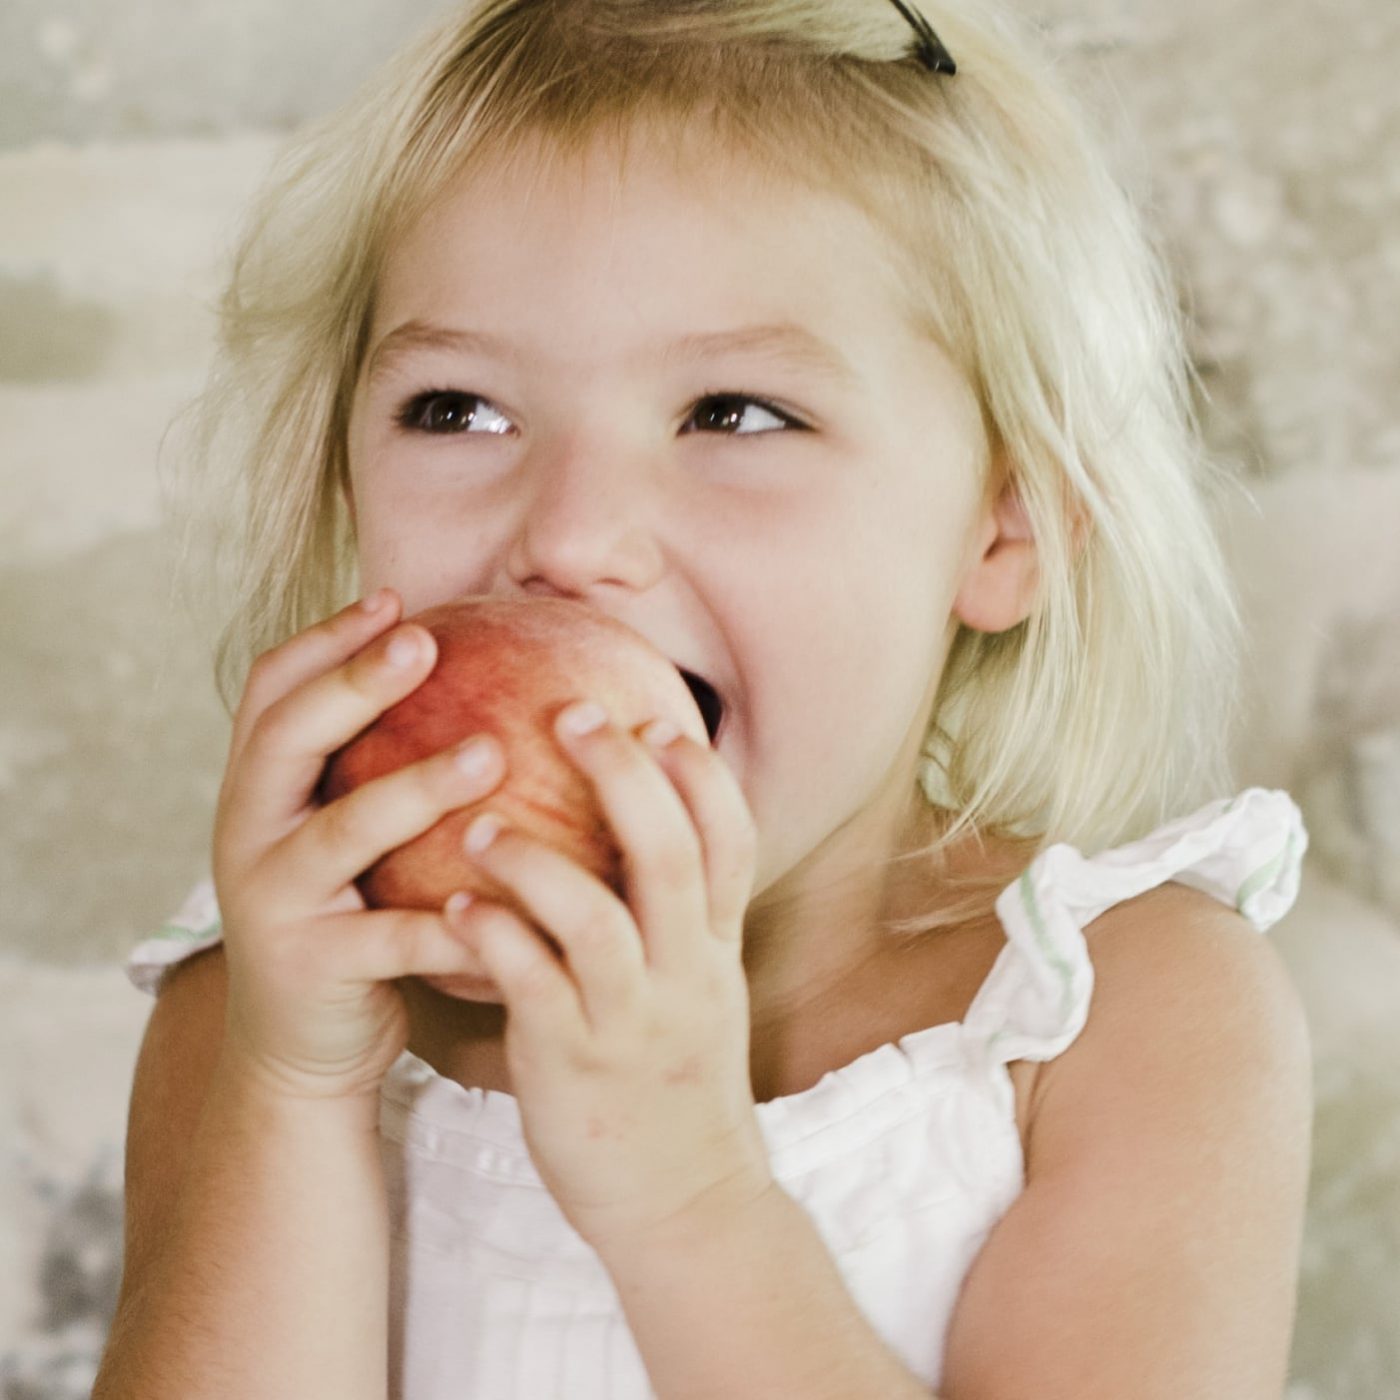 Image of child eating a peach